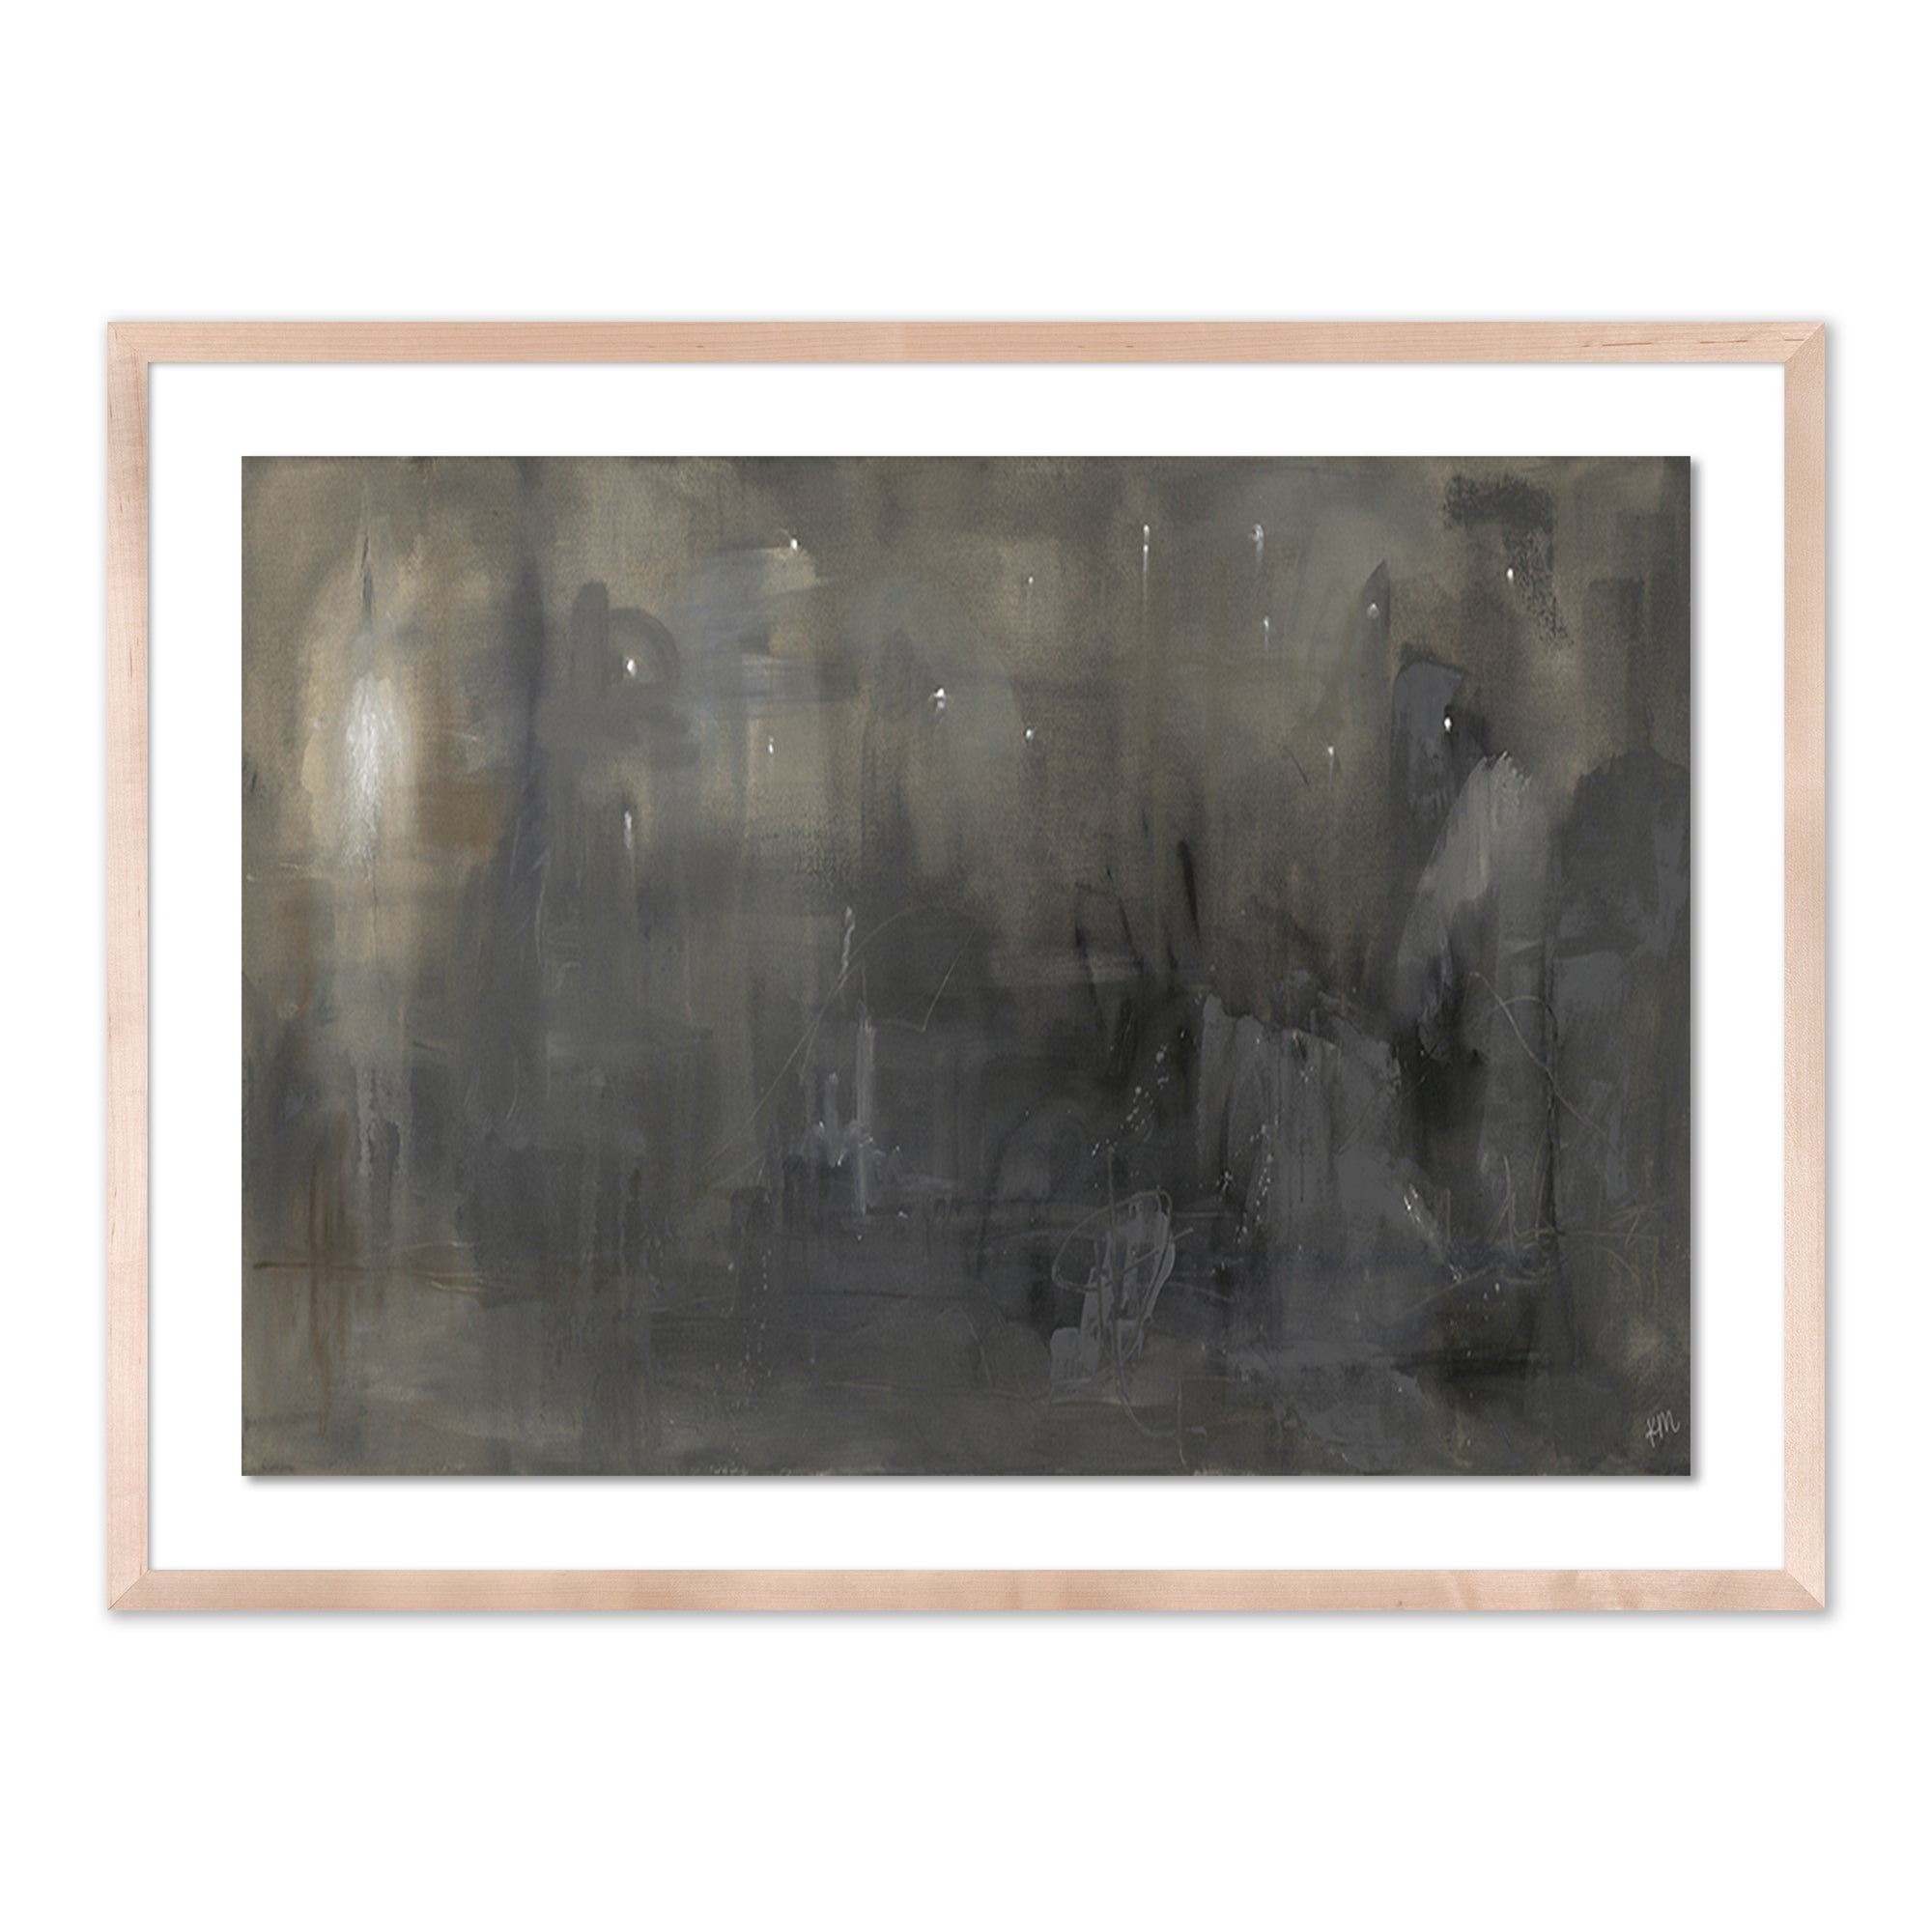 Framed art called Night Divine by Katie Mulder is Inspired by a night sky in the countryside